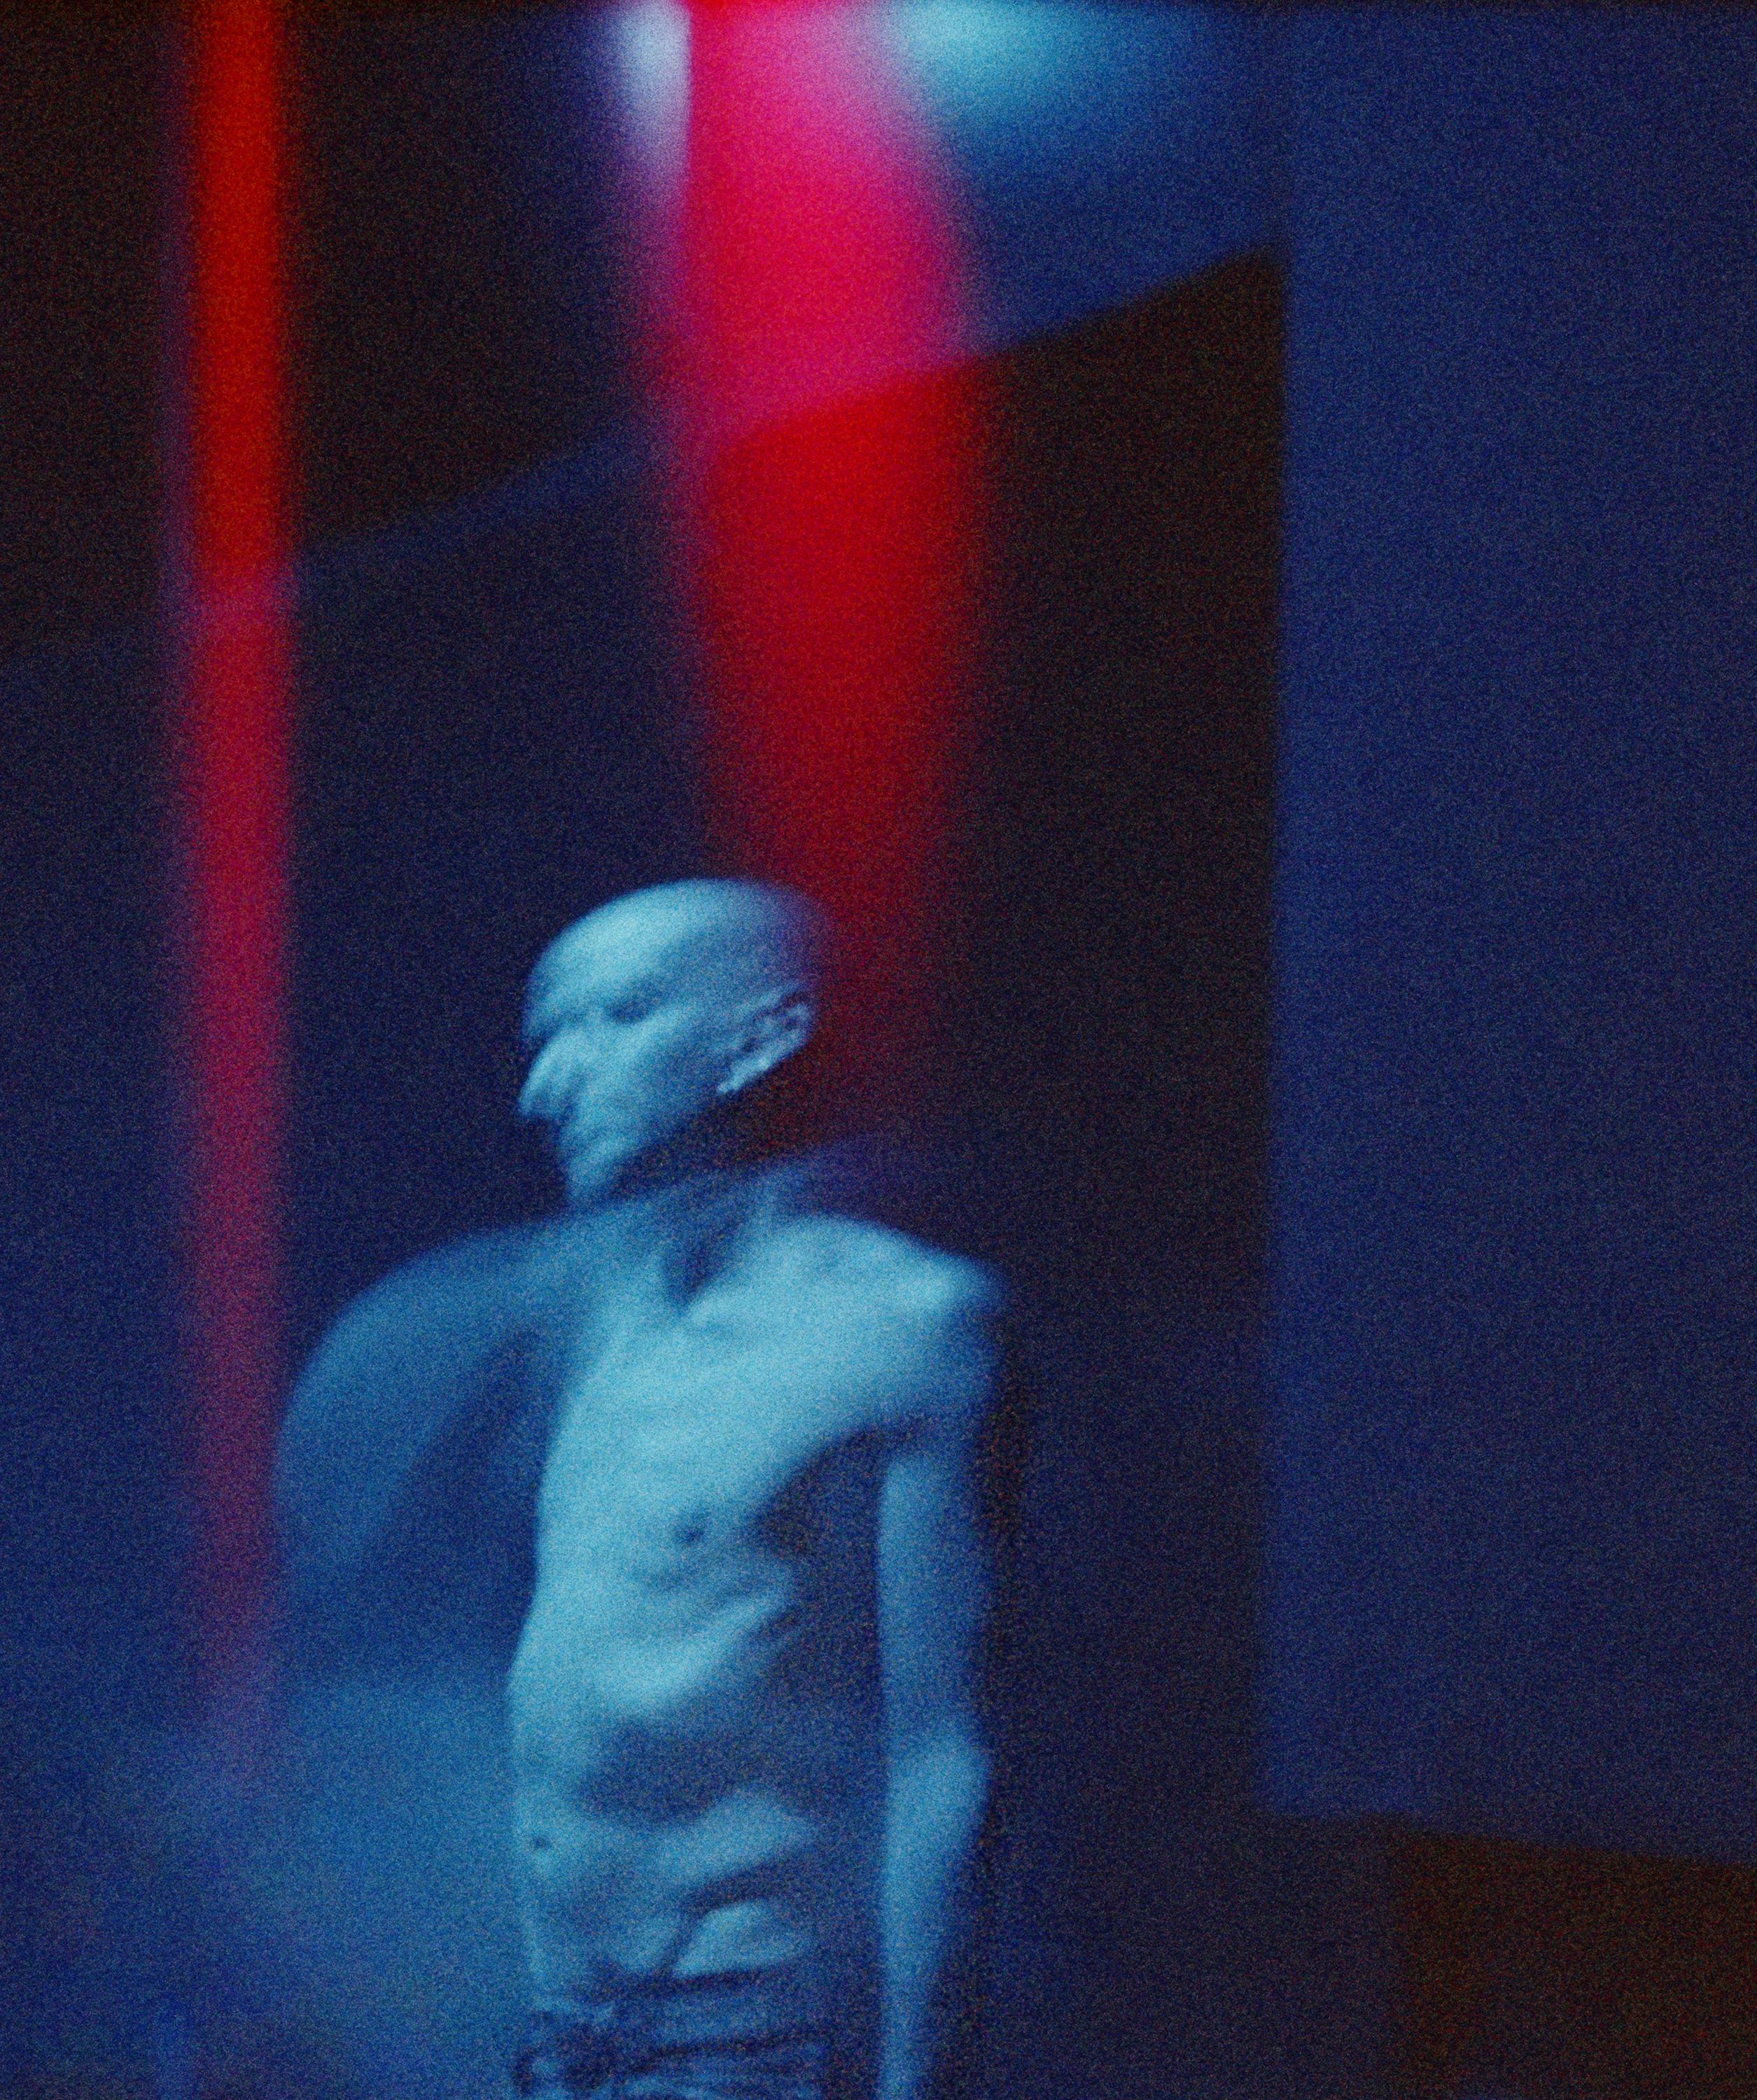 Dancer standing backstage under a blue light with red reflections